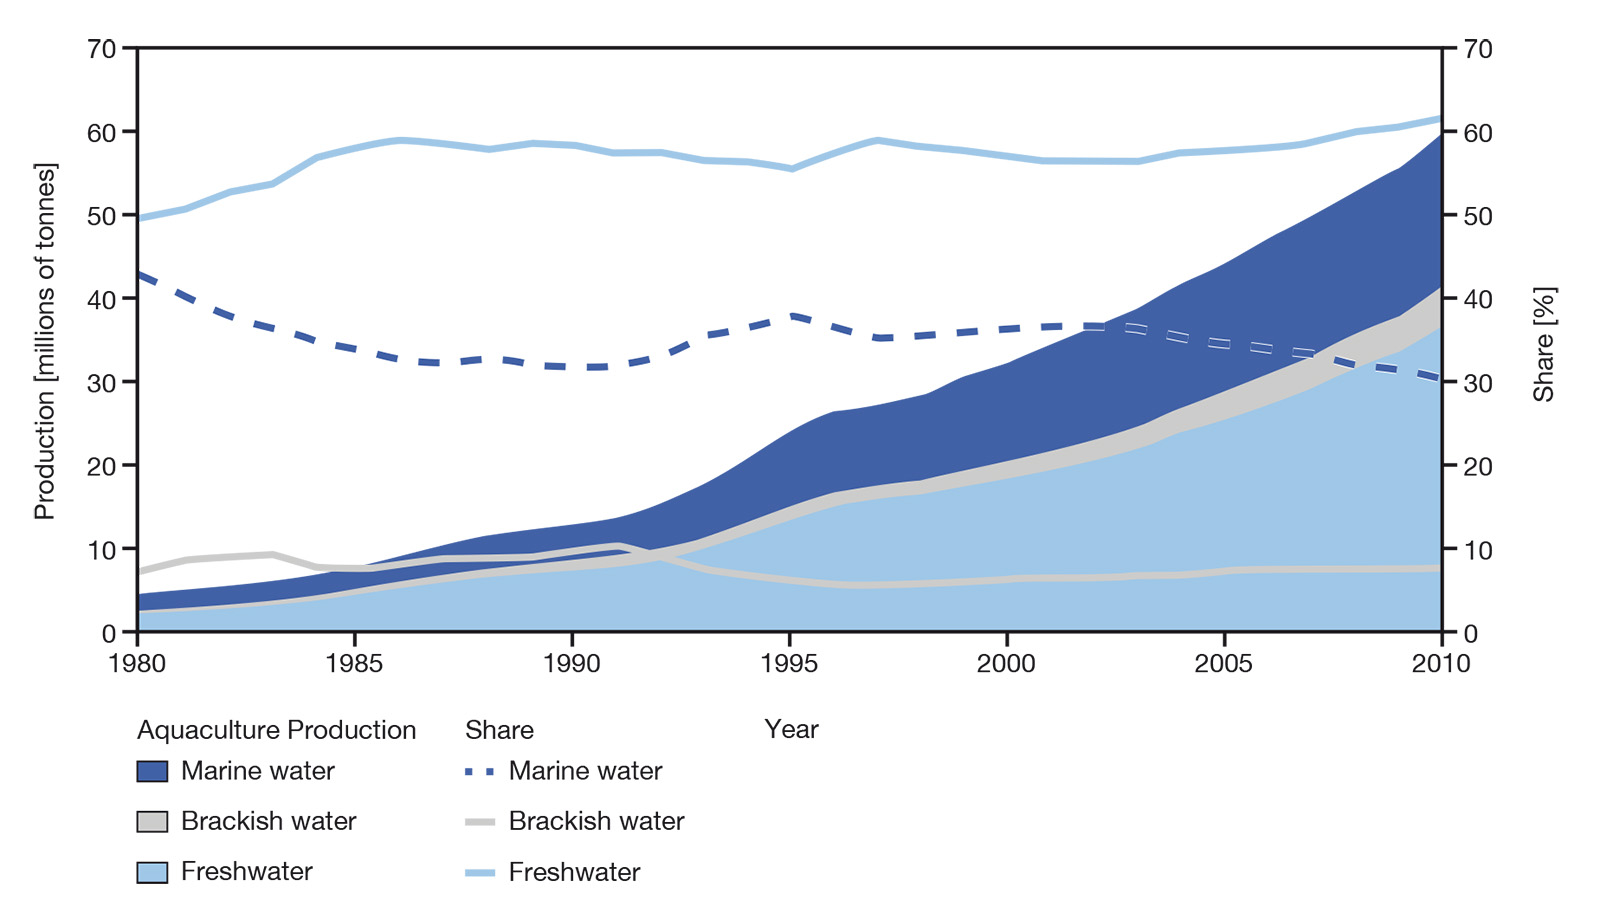 World aquaculture production from 1980 to 2010 (in millions of tonnes); trends in types of production (freshwater, brackish water and marine water).